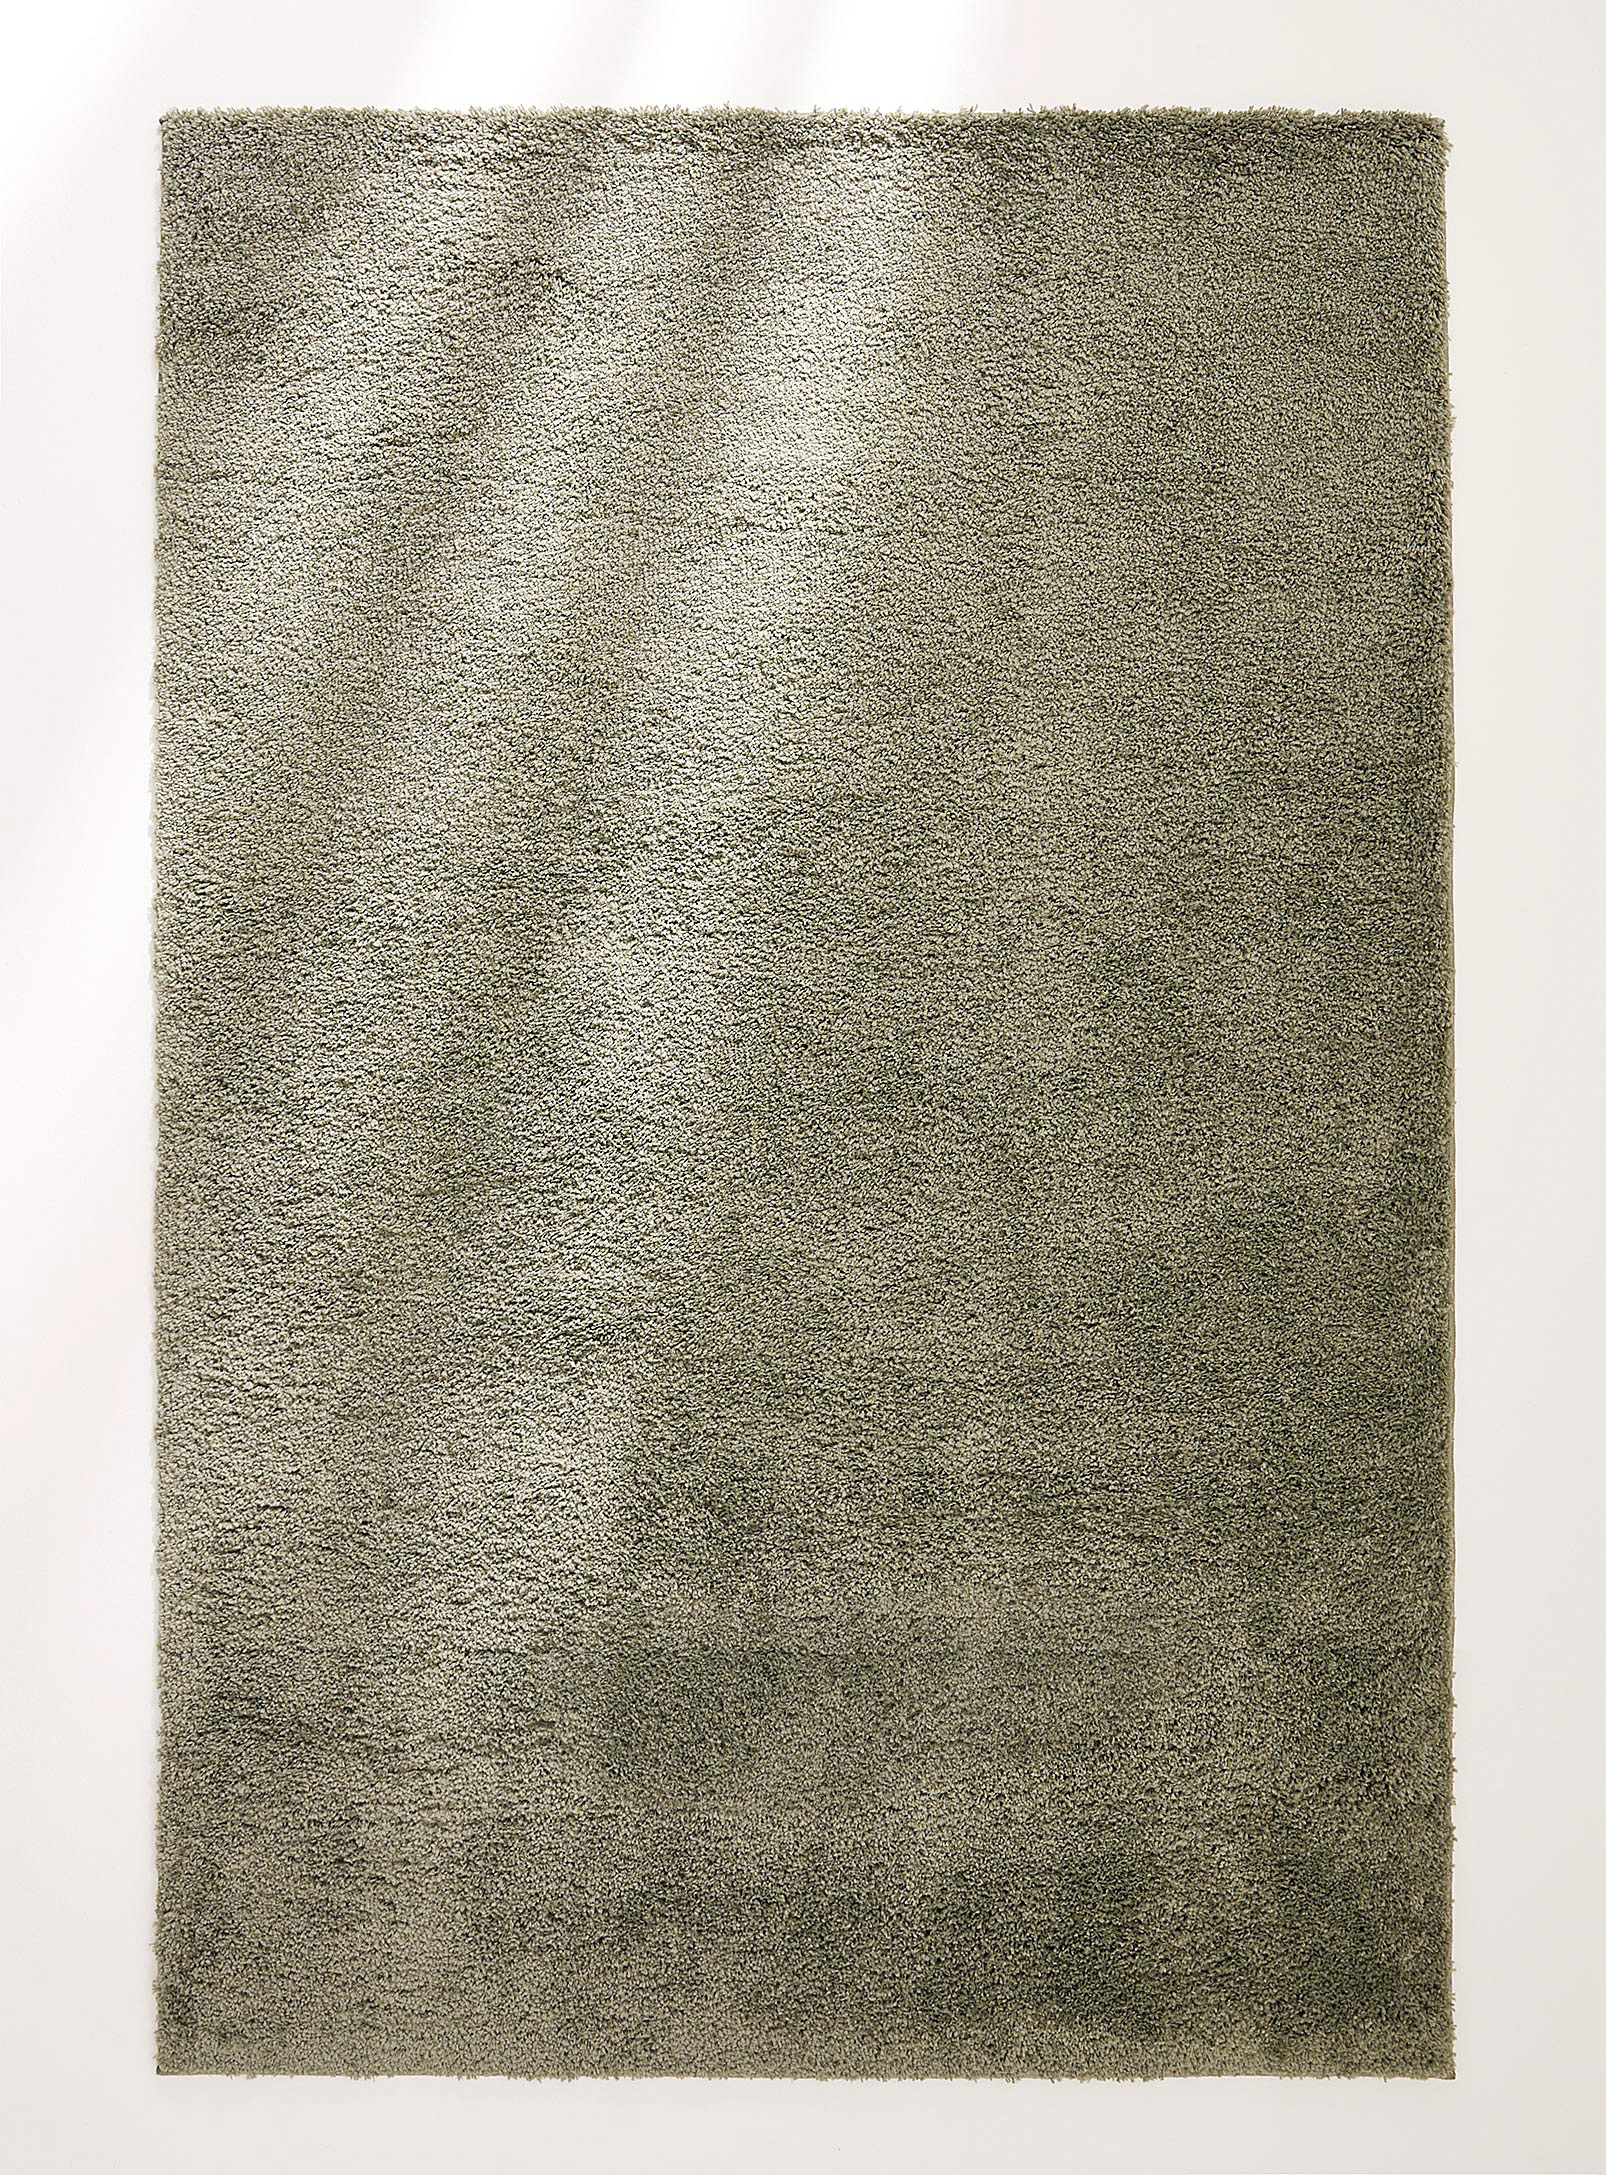 Simons Maison Nature's Essence Shag Rug See Available Sizes In Lime Green